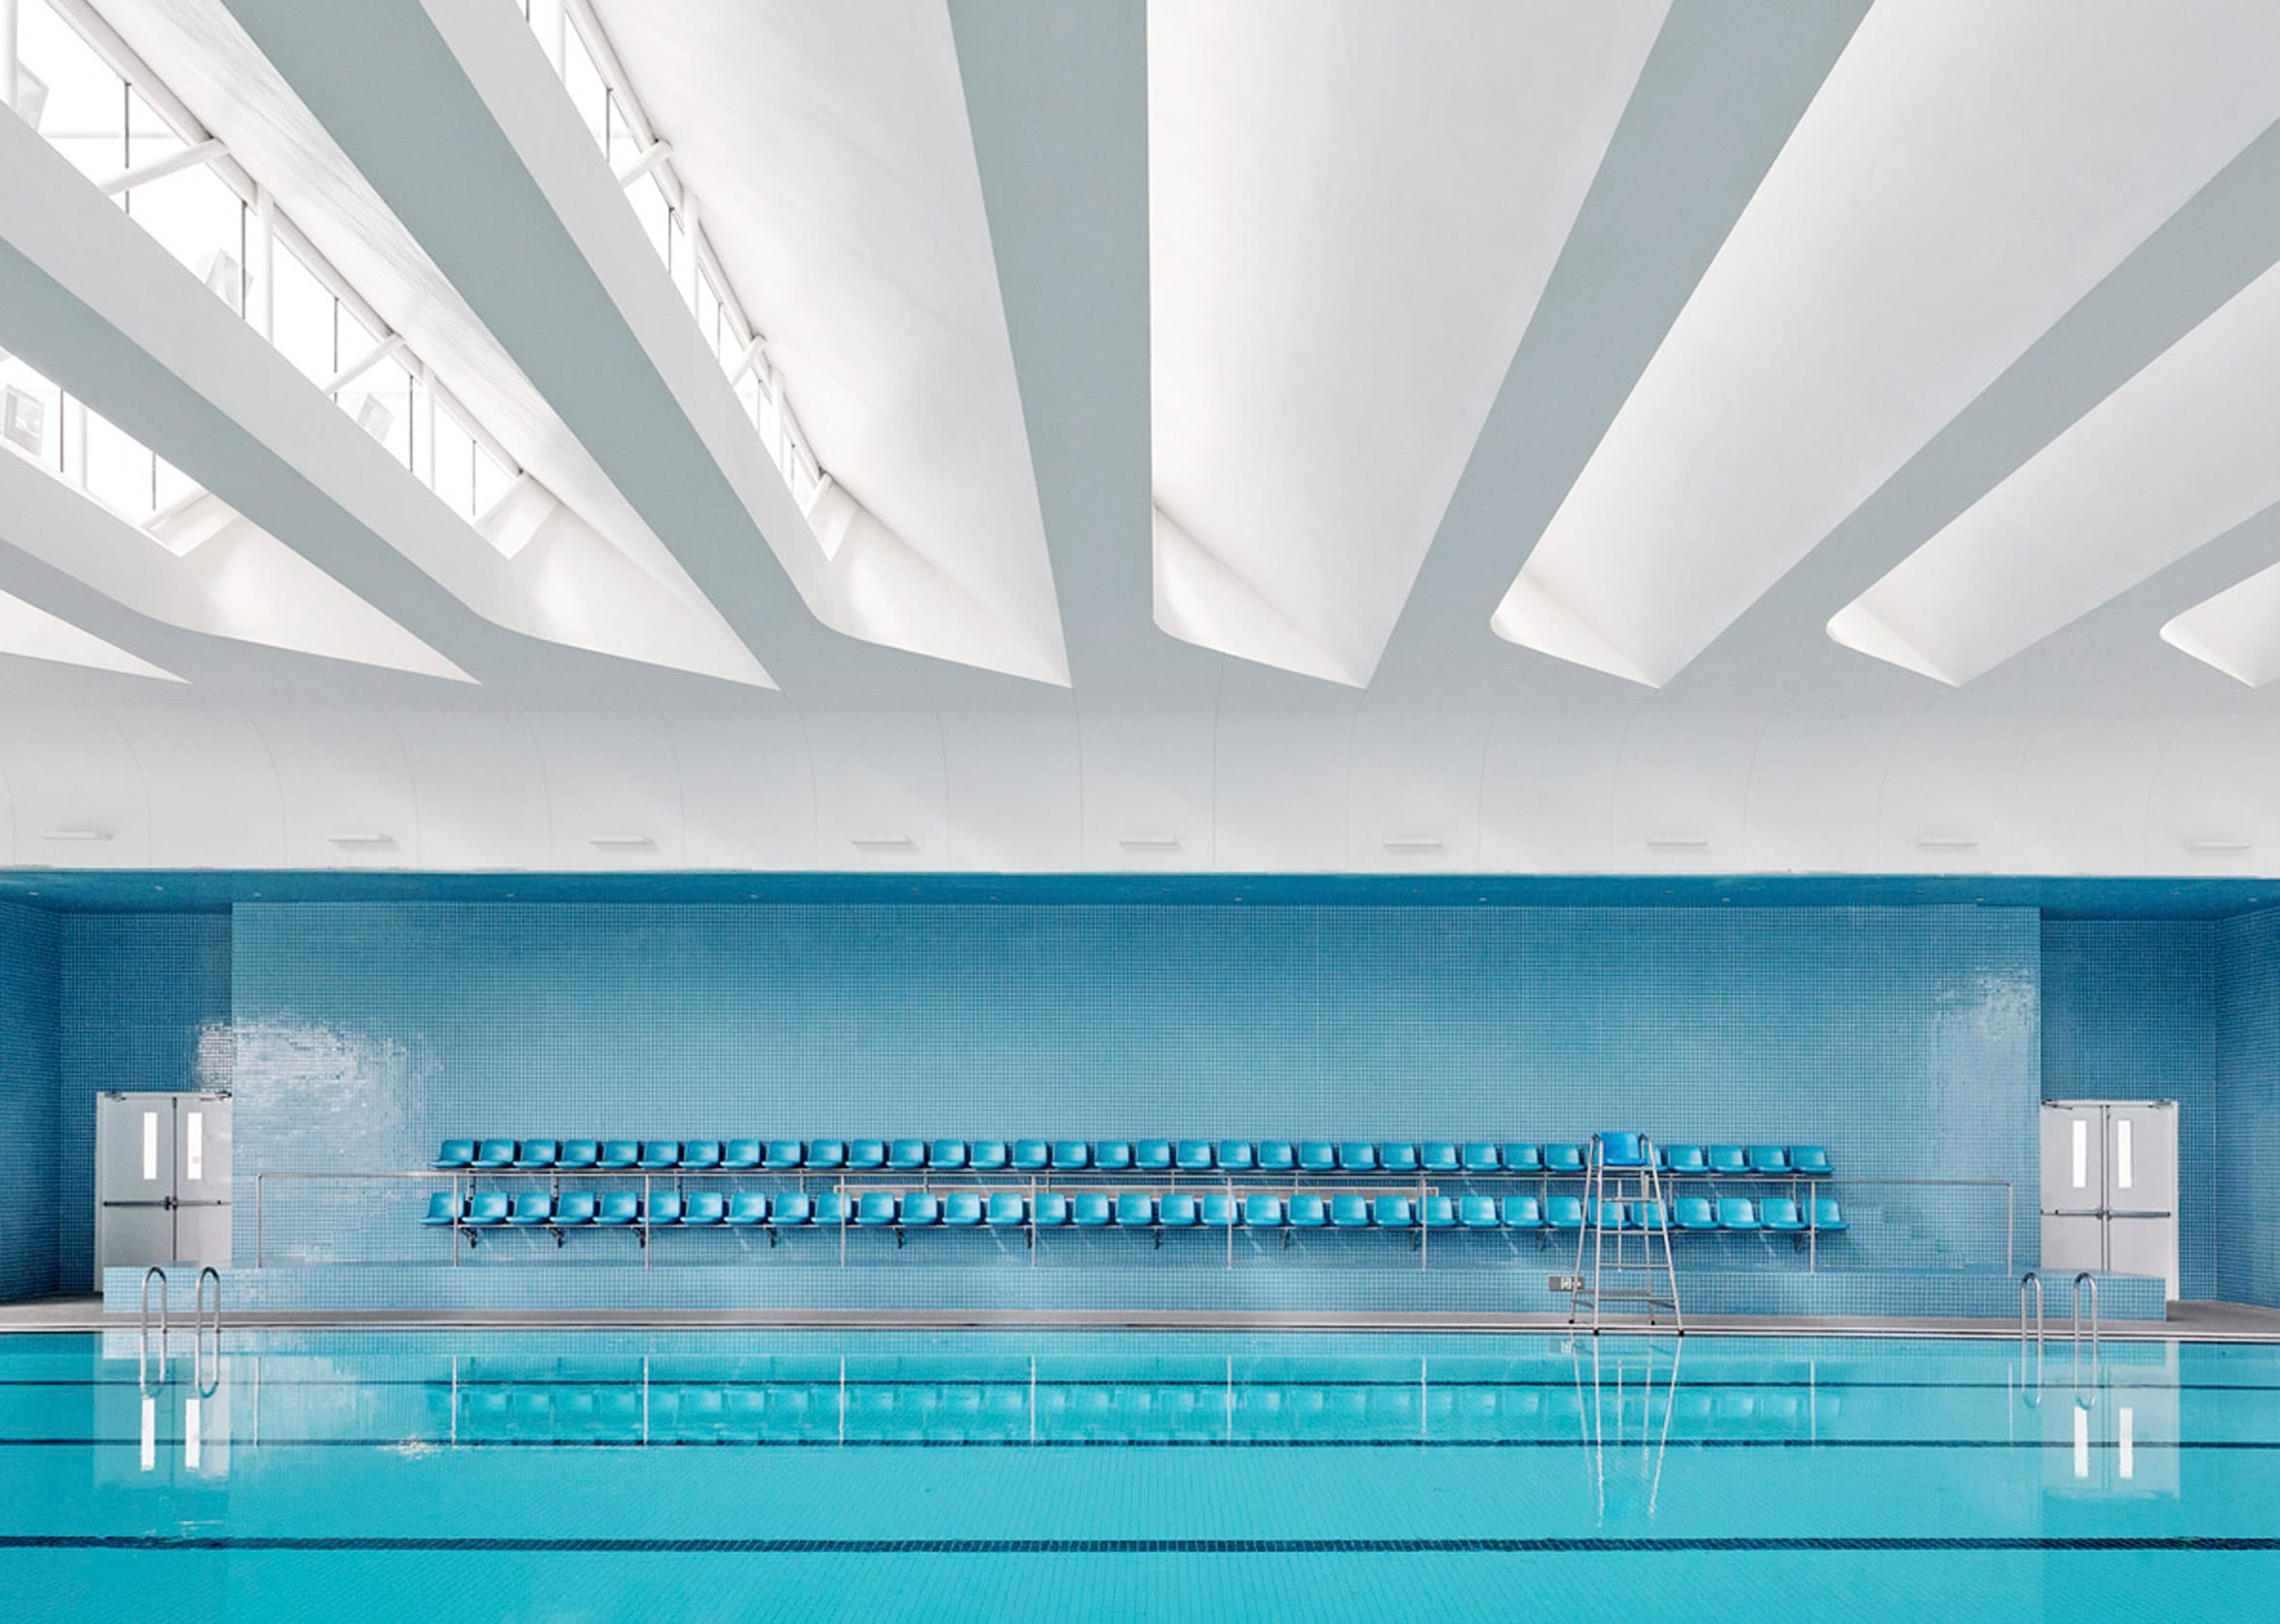 Swimming pool at Shanghai Qingpu Pinghe International School by Open Architecture